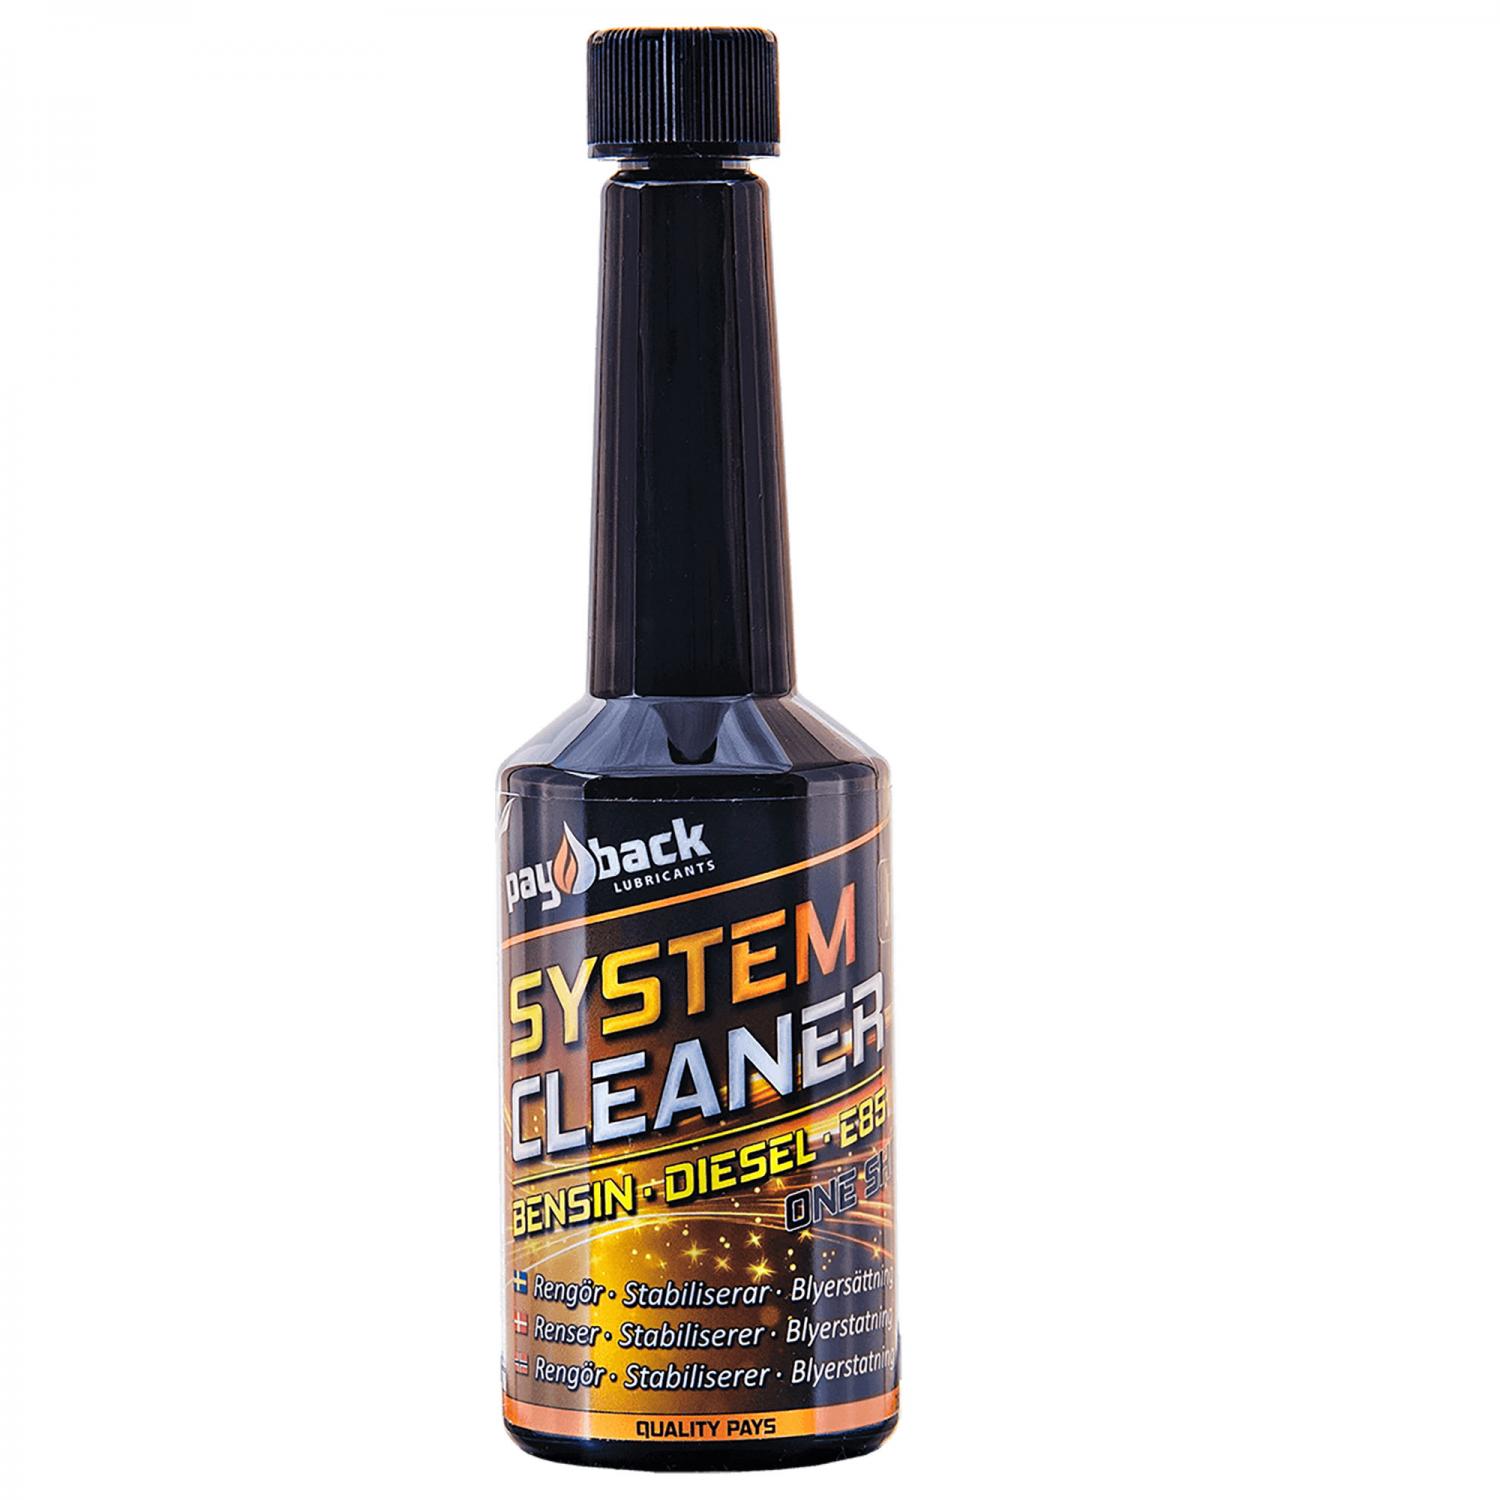 Payback #470 Fuel Cleaner & Stabilizer 250ml